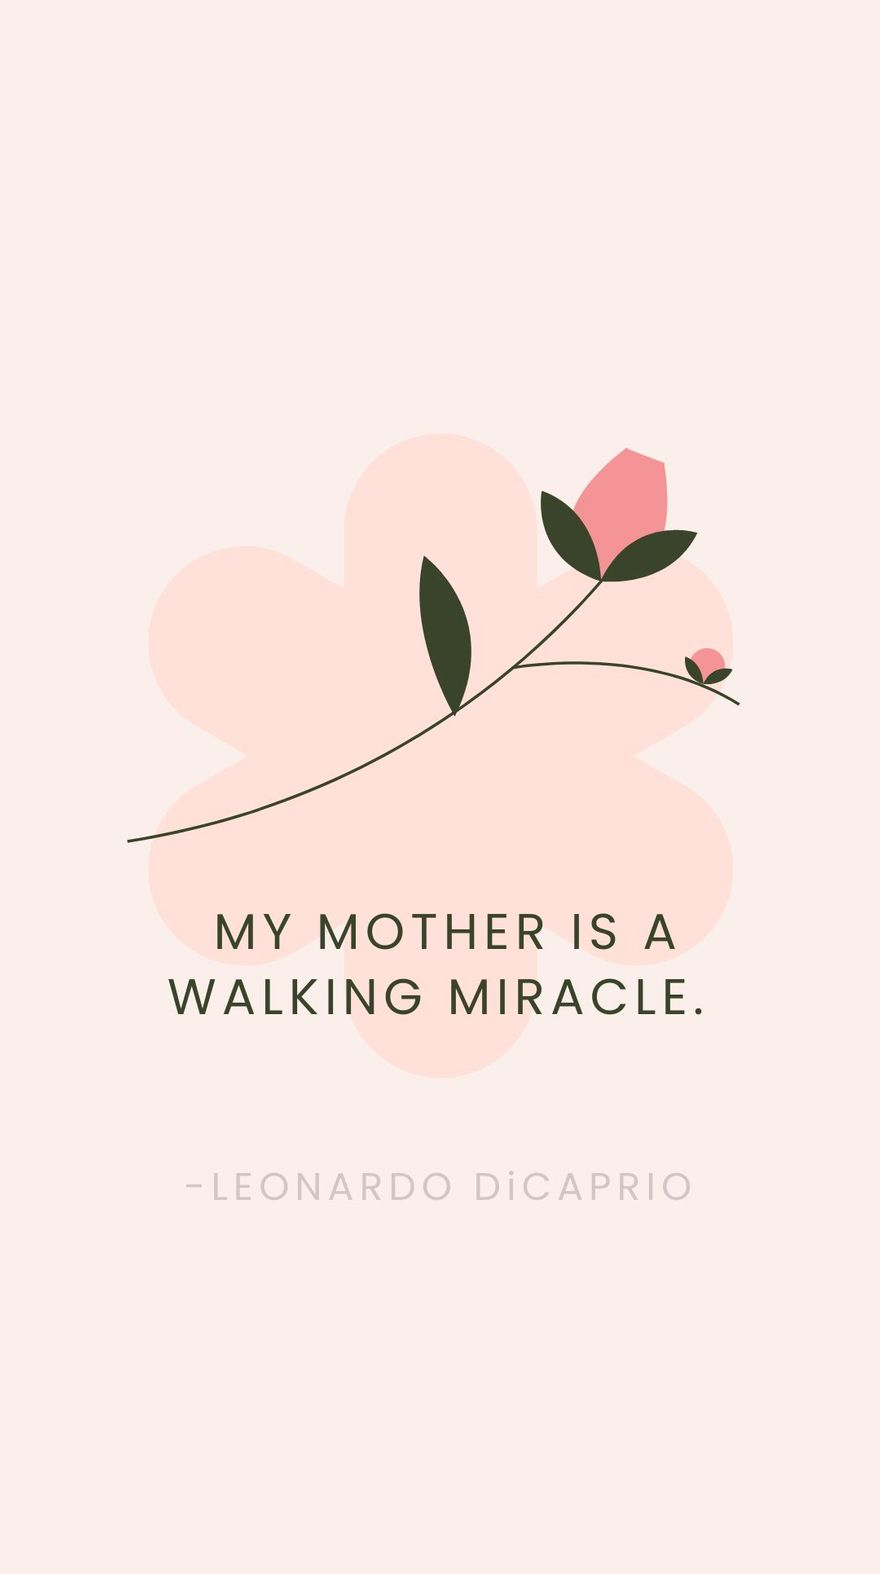 Free Leonardo DiCaprio - My mother is a walking miracle. 